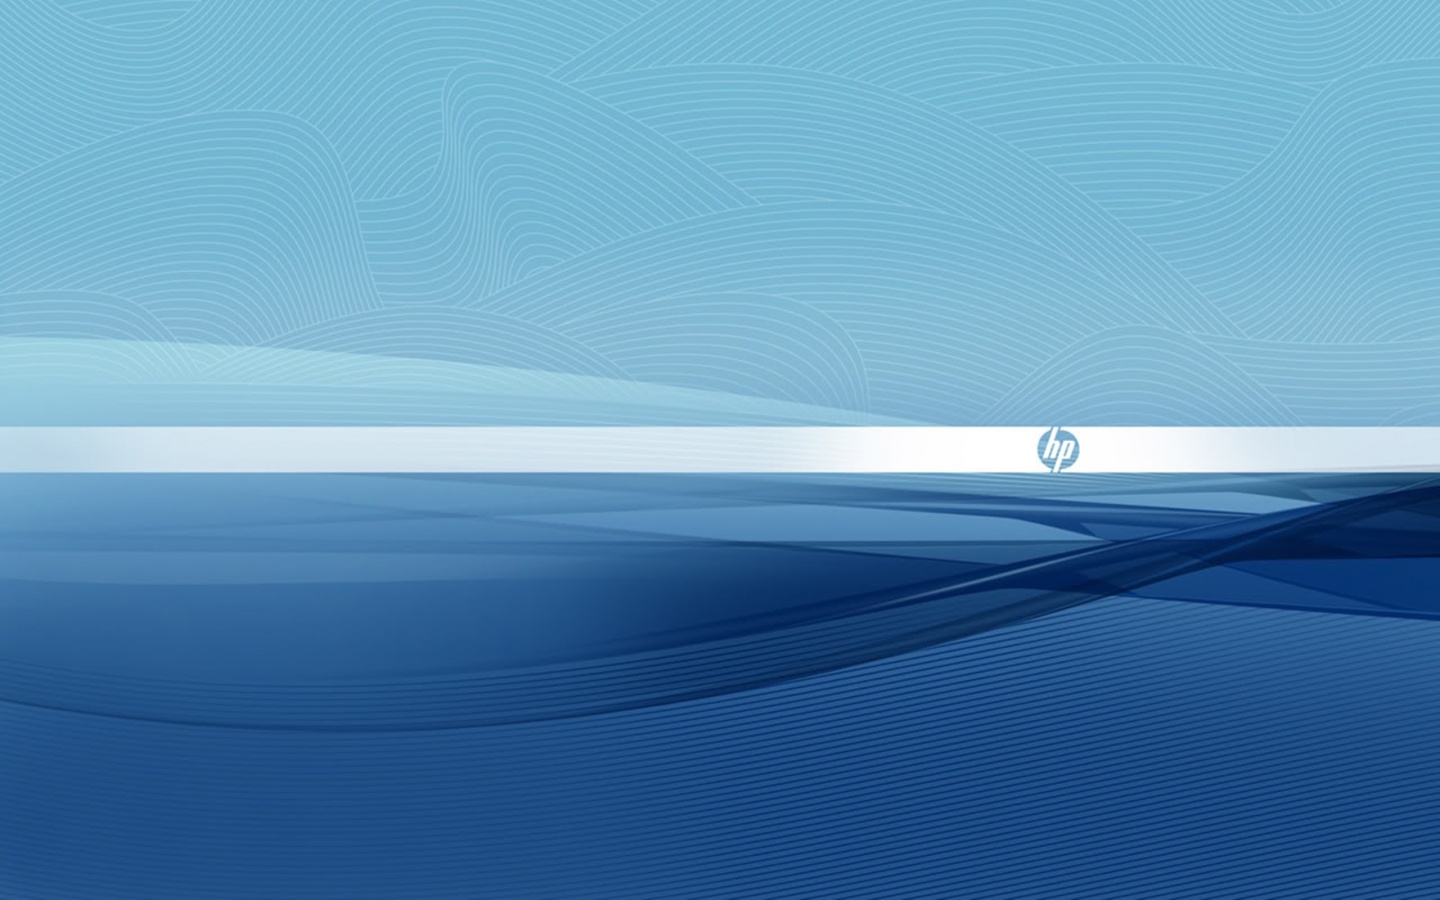 Hp Wave Desktop Pc And Mac Wallpaper Pictures